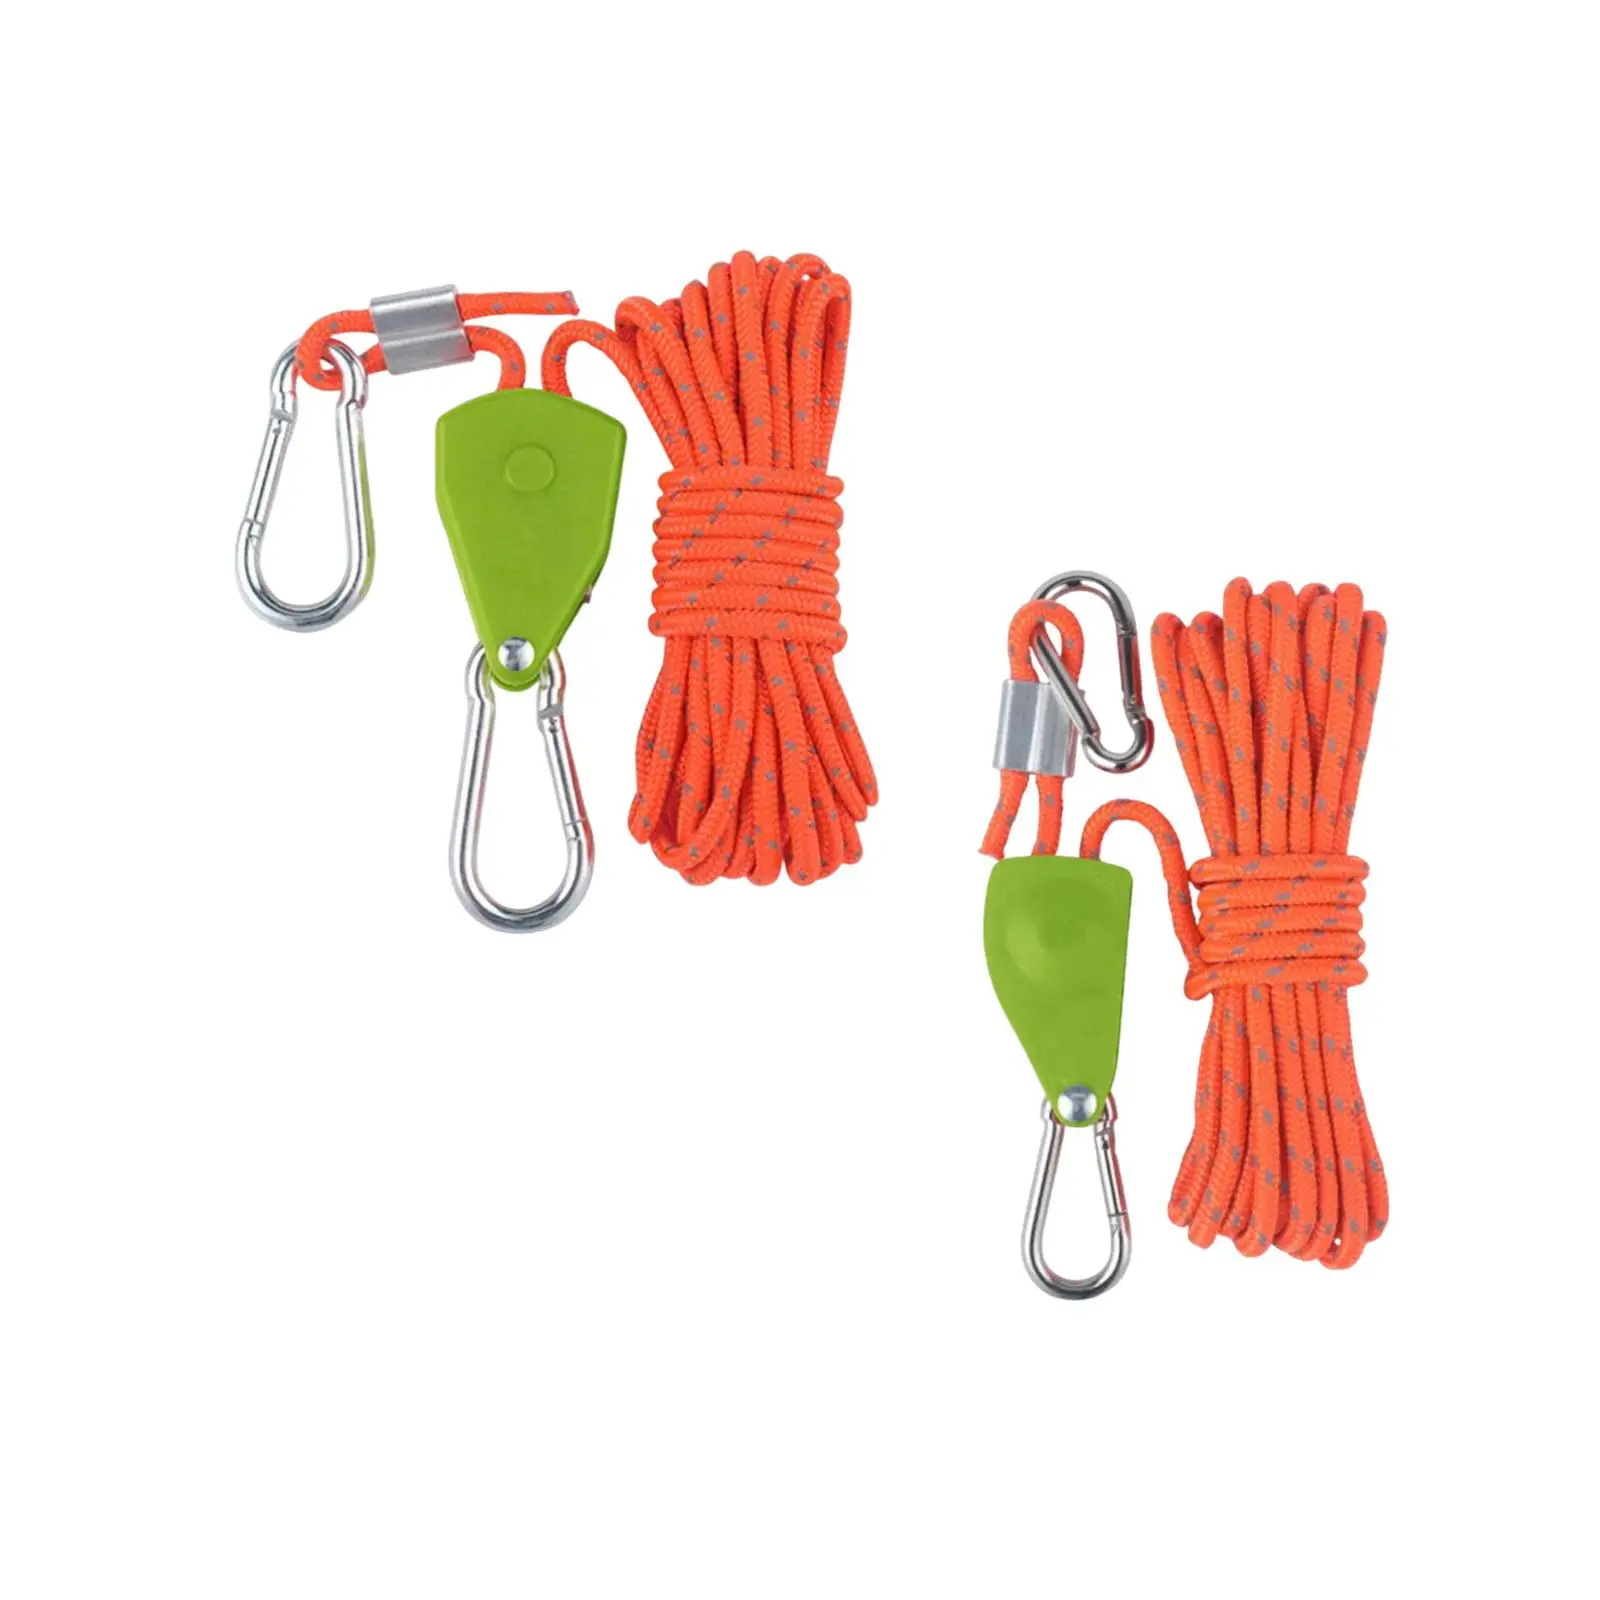 Outdoor Camping Tent Rope w/ Ratchet Pulley Tent Guy Ropes Kayak Camping Rope Cord Guy Lines Adjuster for Tarp Canopy Shelter